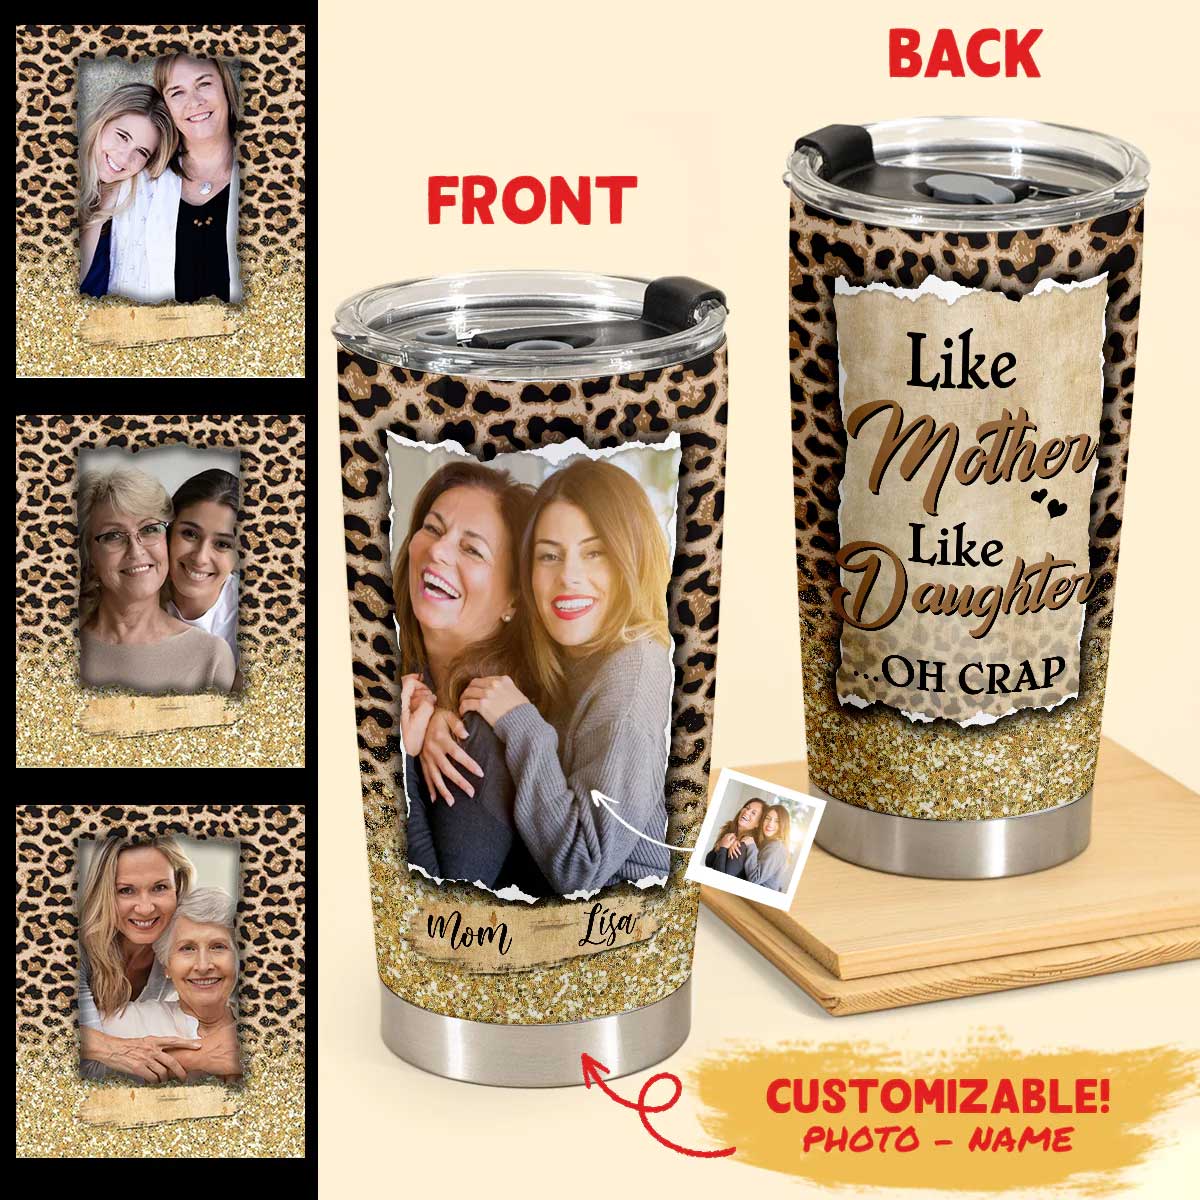 Best Personalized Mother's Day Gifts Tumbler - Custom Gift For Mother's Day, Presents for Mom - Like Mother Like Daughter Oh Crap - Custom Photo Gifts